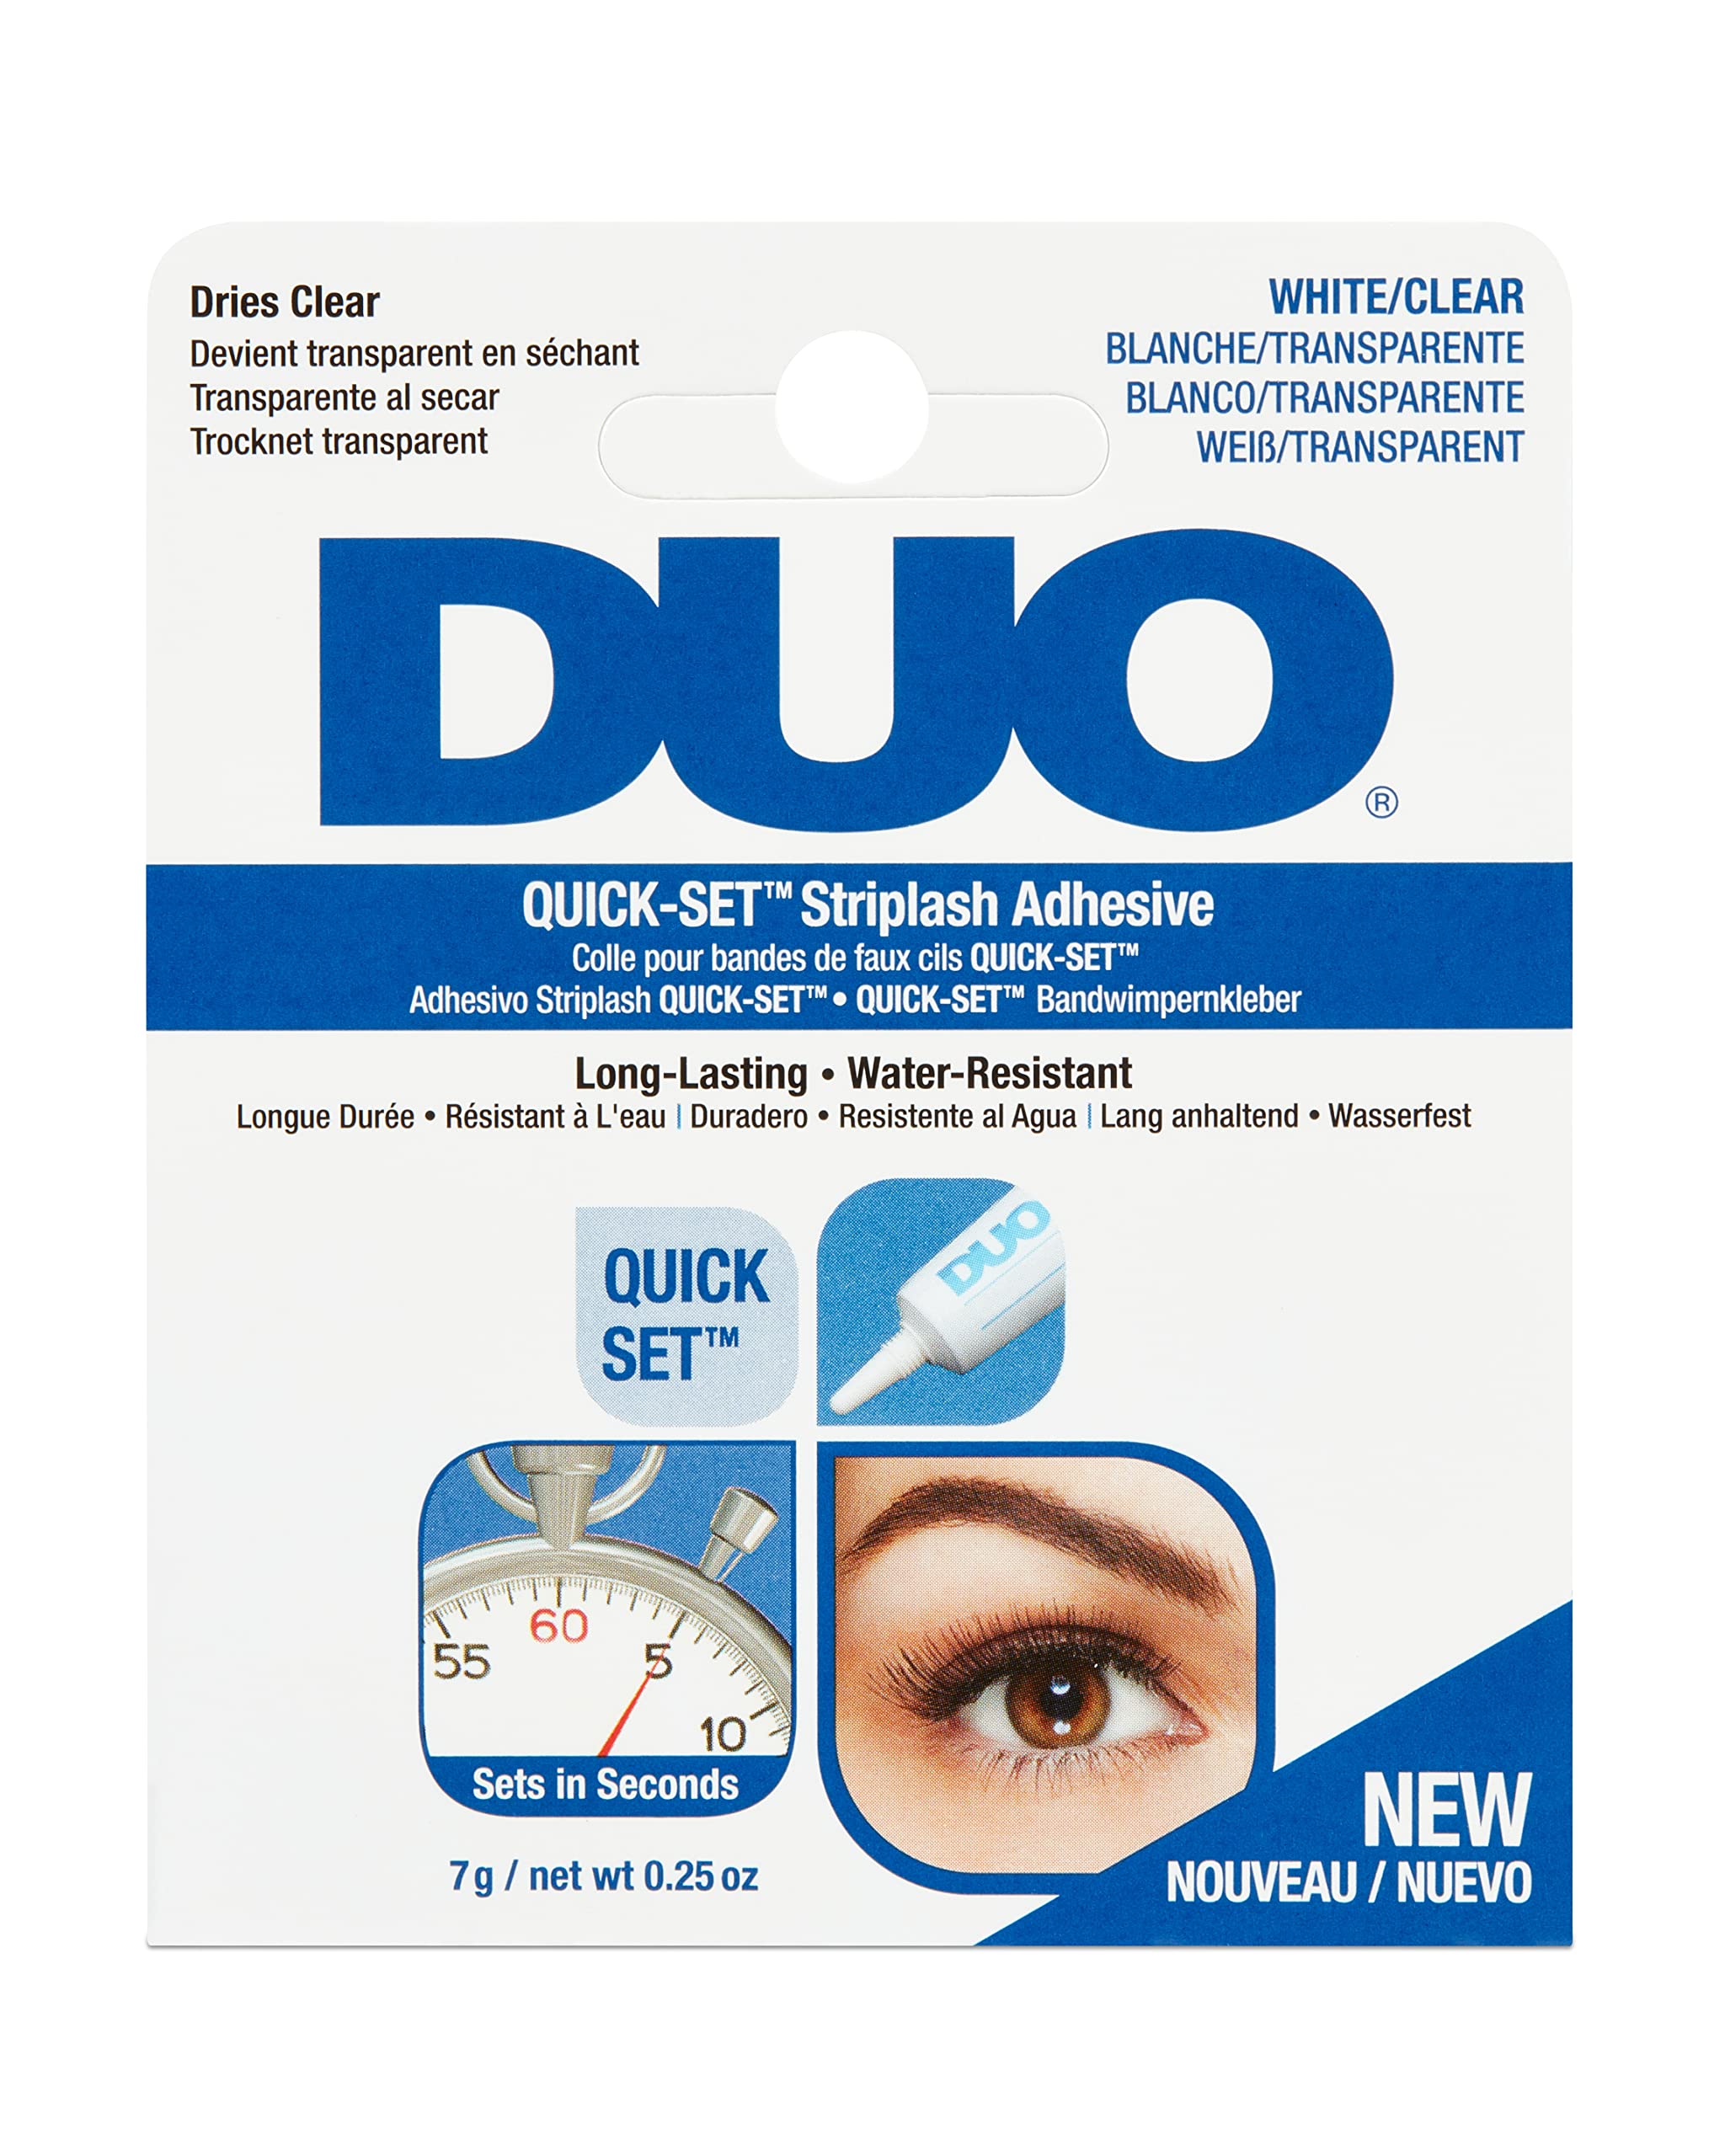 DUO Quick-Set Striplash Adhesive Clear 7g Eyelash Adheisve Applies White Dries Clear All-Day Wear Strip And Individual Lashes Sets In Seconds Water-Resistant Vegan-Friendly Cruelty-Free Eyelashes